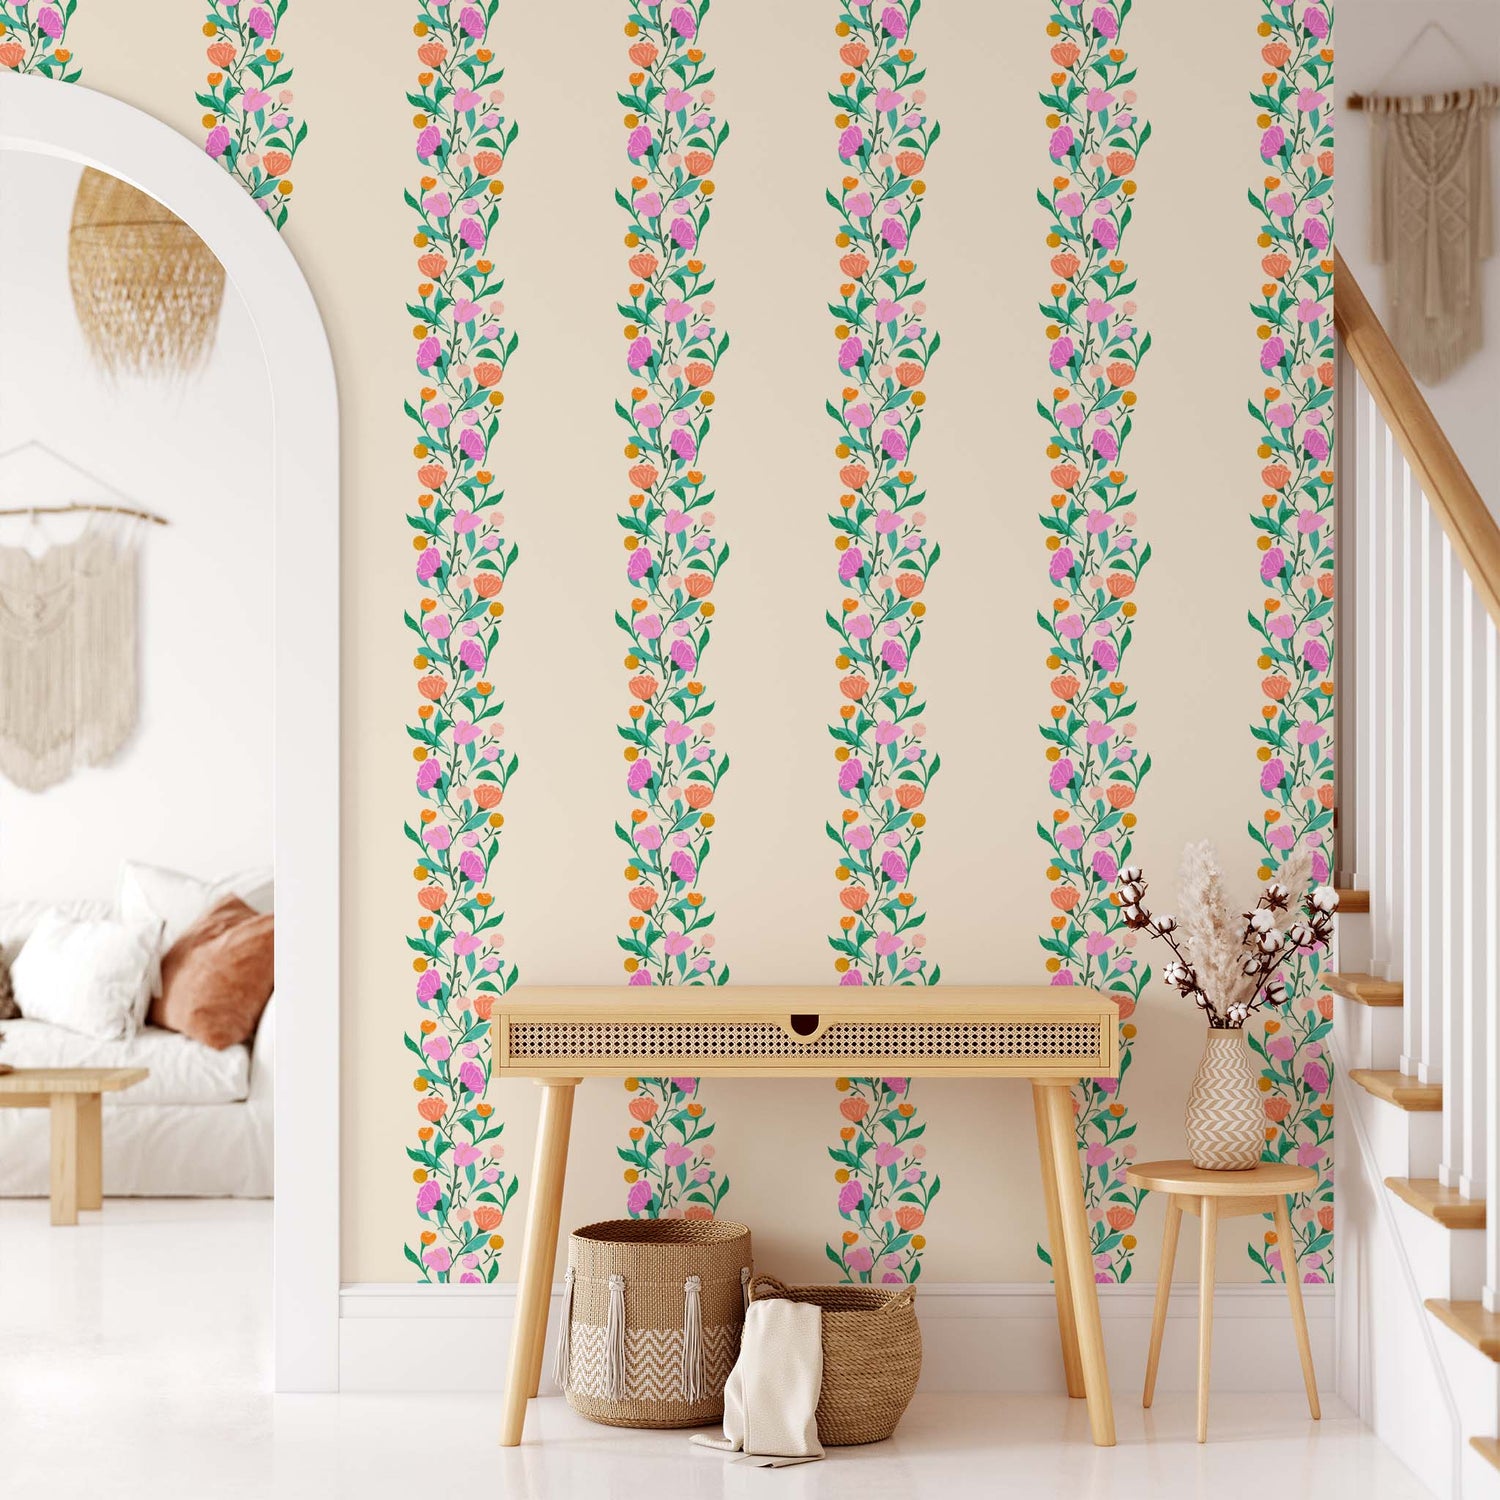 Living room preview of this Floral Stripe Wallpaper in Bright by artist Brenda Bird for Ayara.